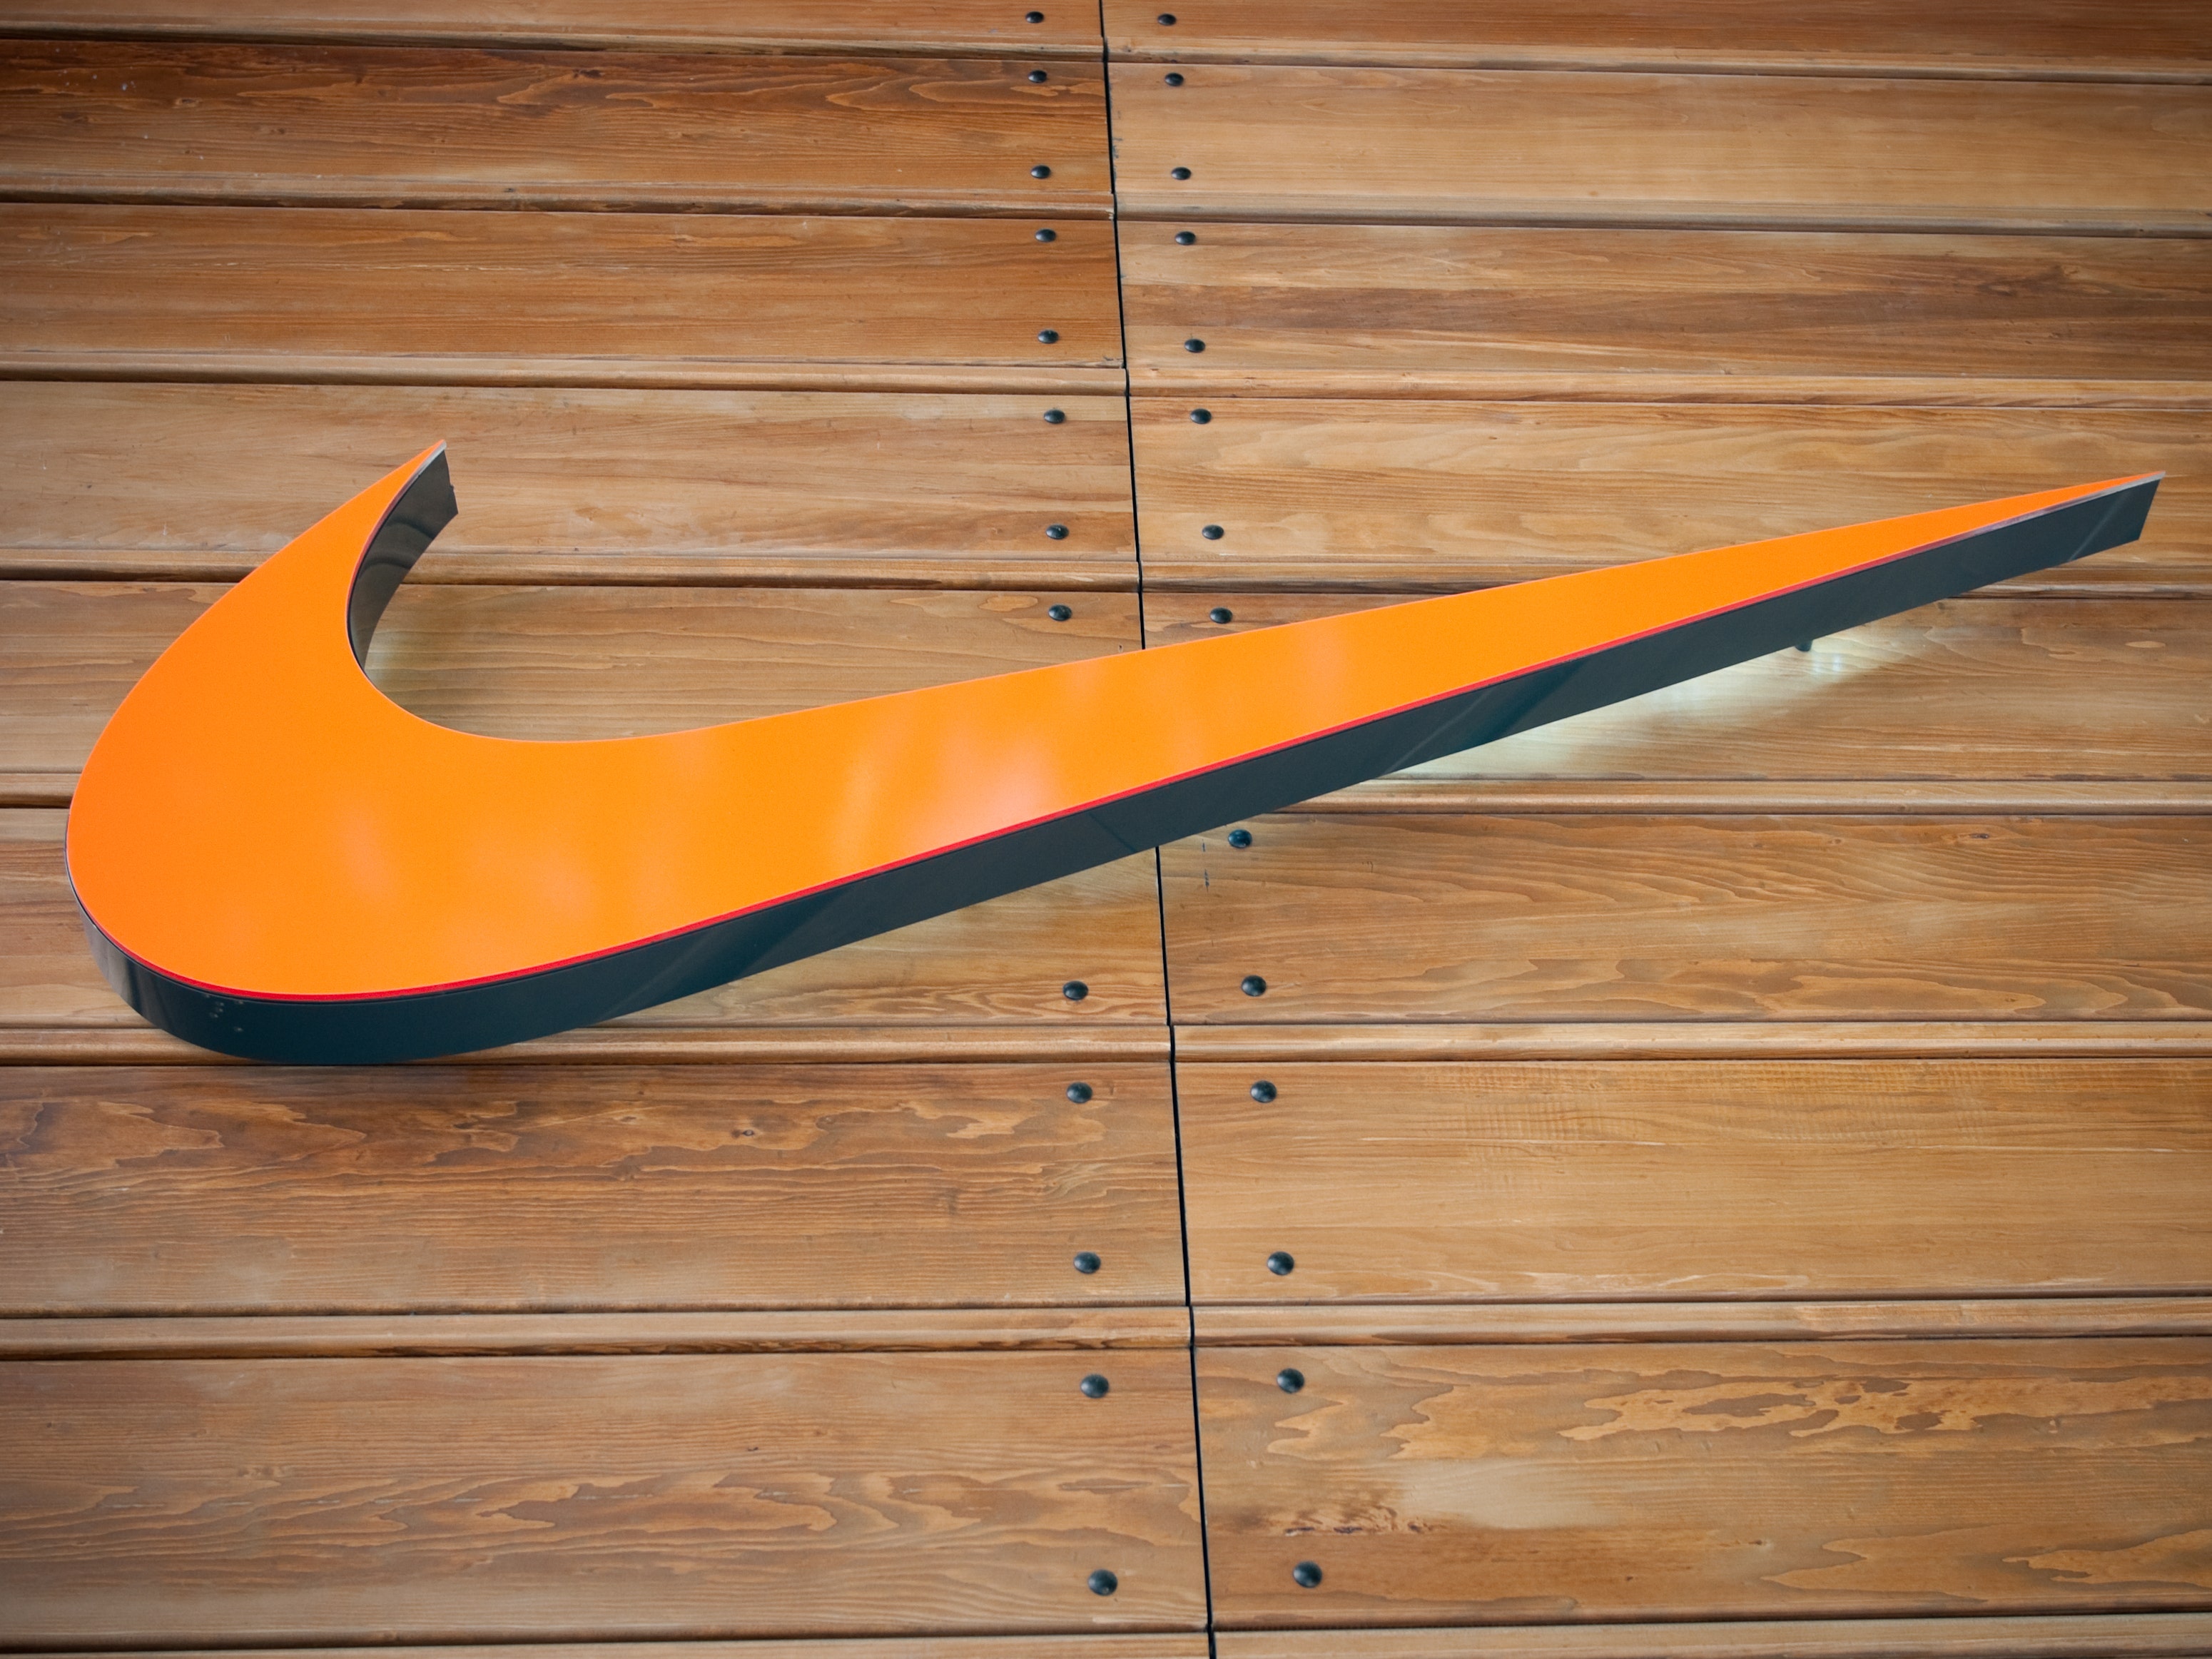 Nike: Problems And Management's Are Not Helping (NYSE:NKE) |